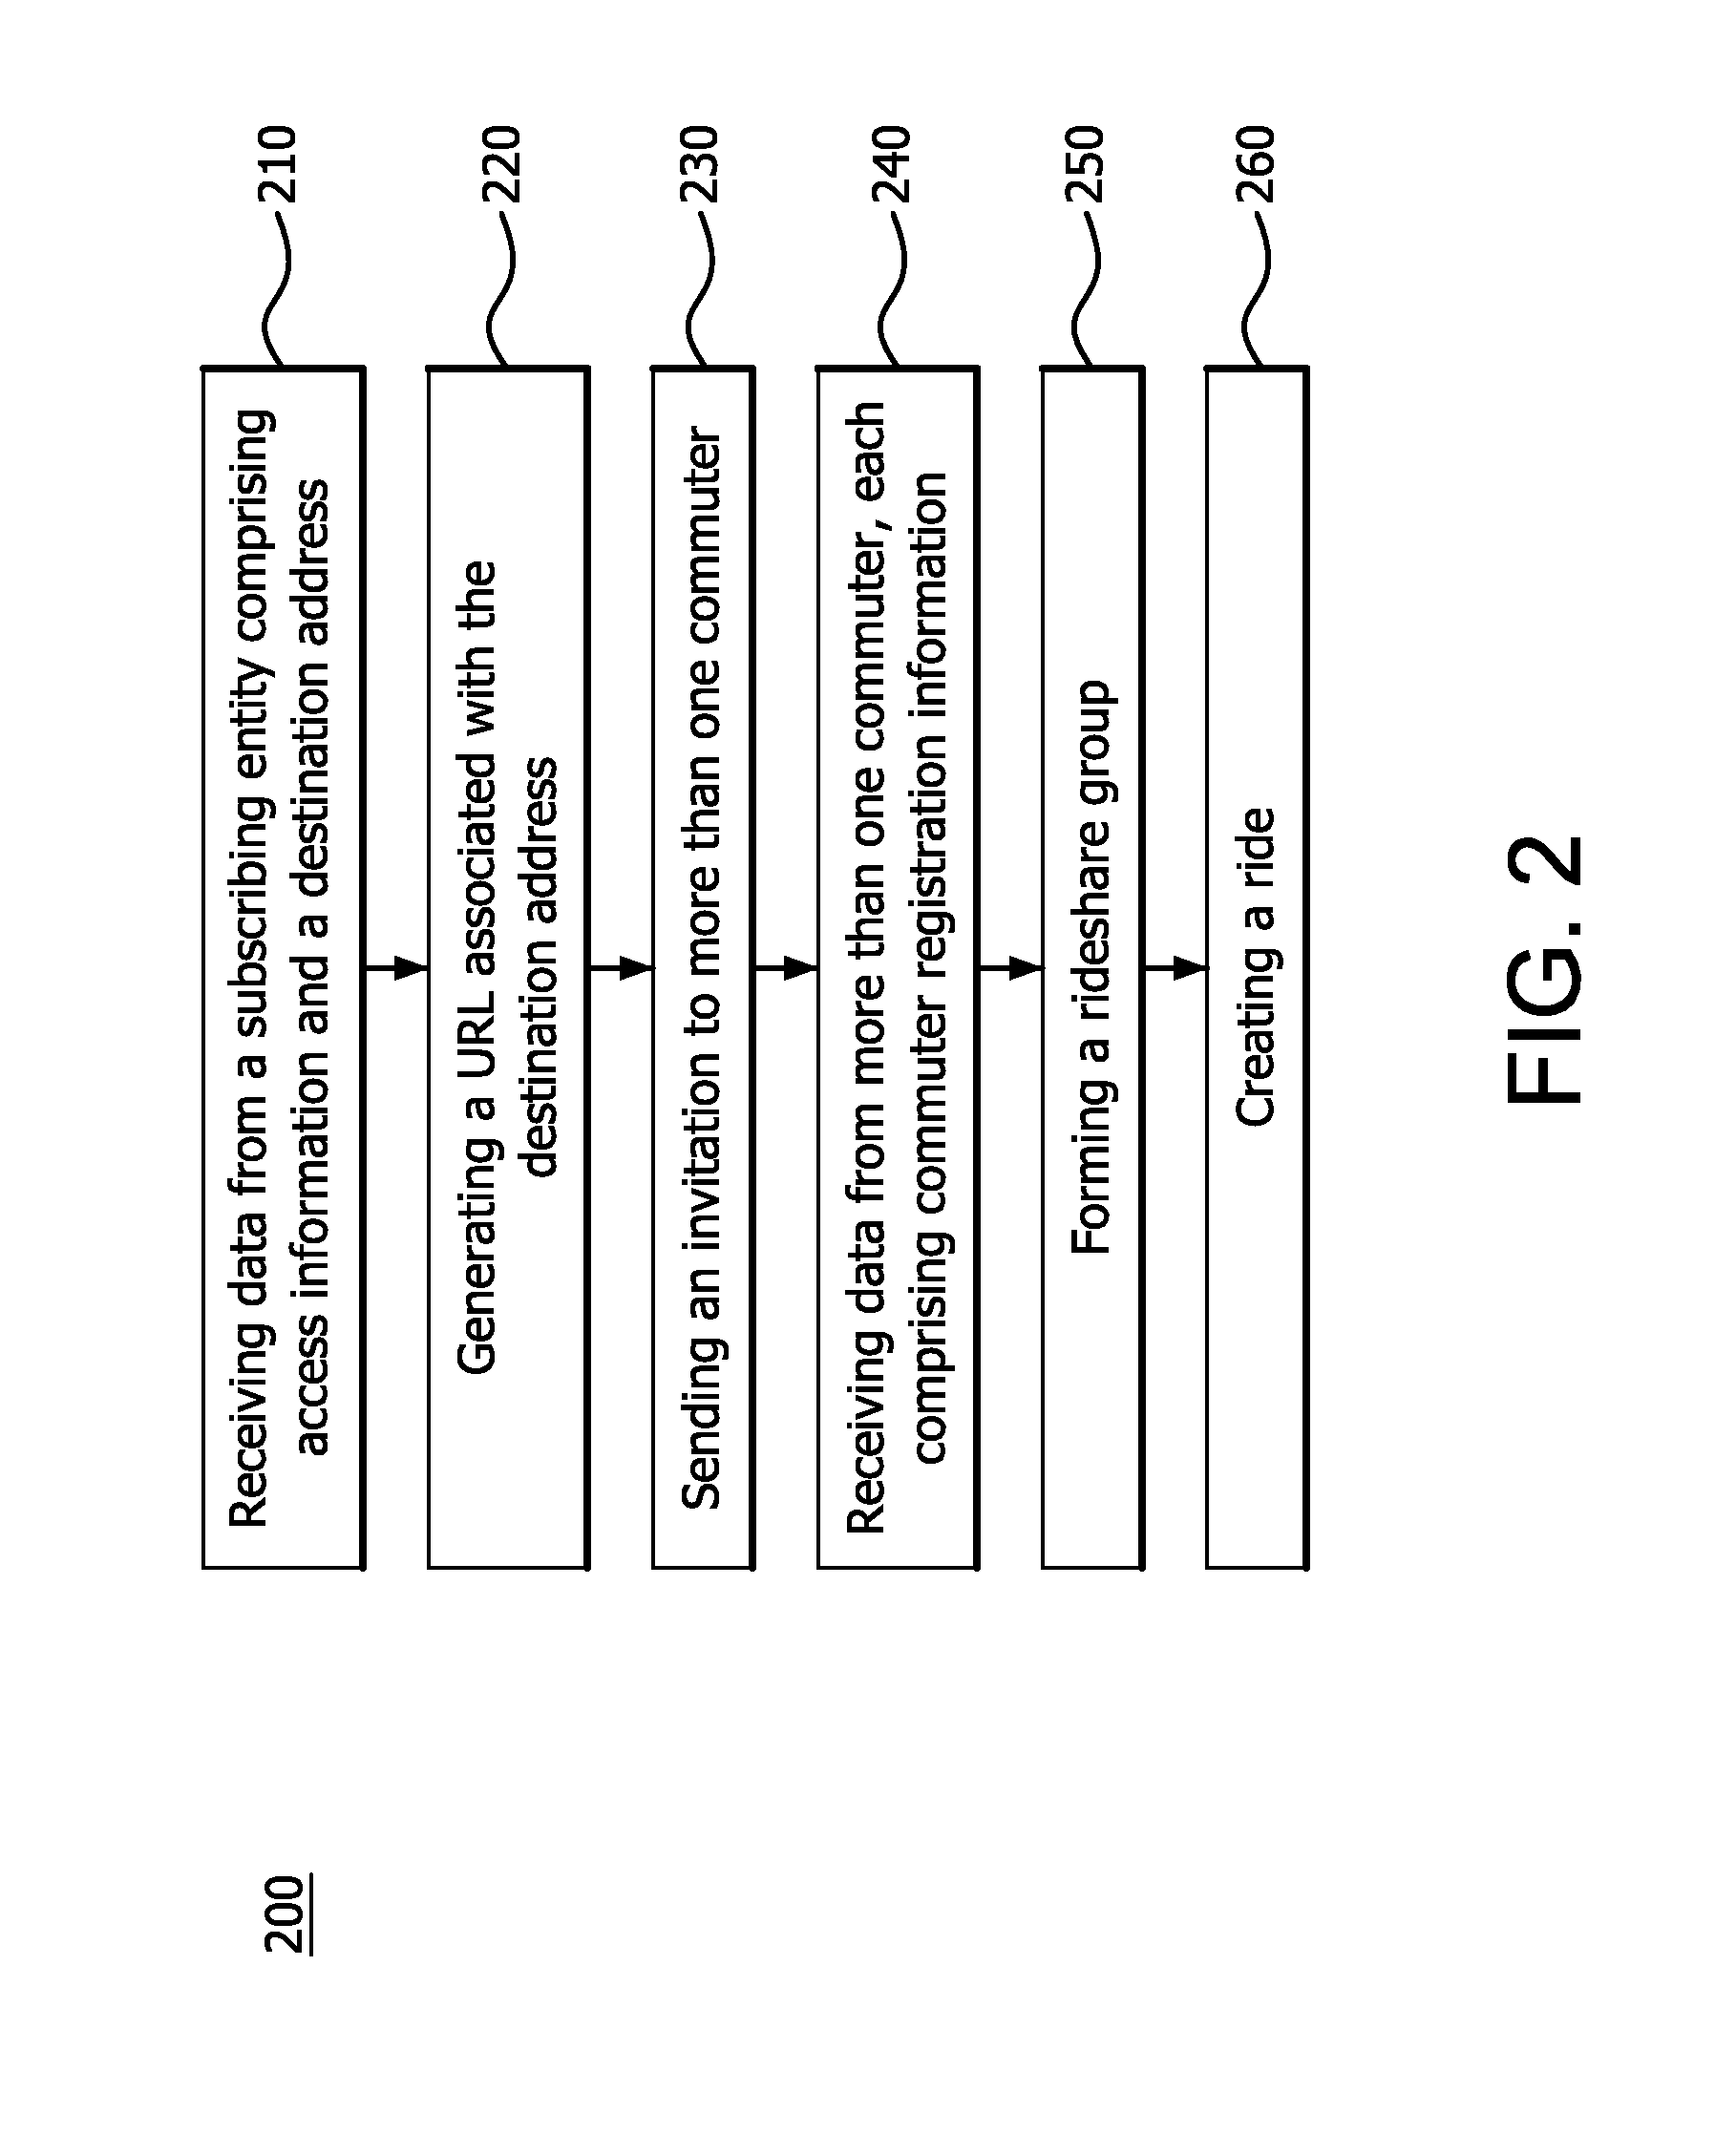 Methods and systems for scheduling a shared ride among commuters